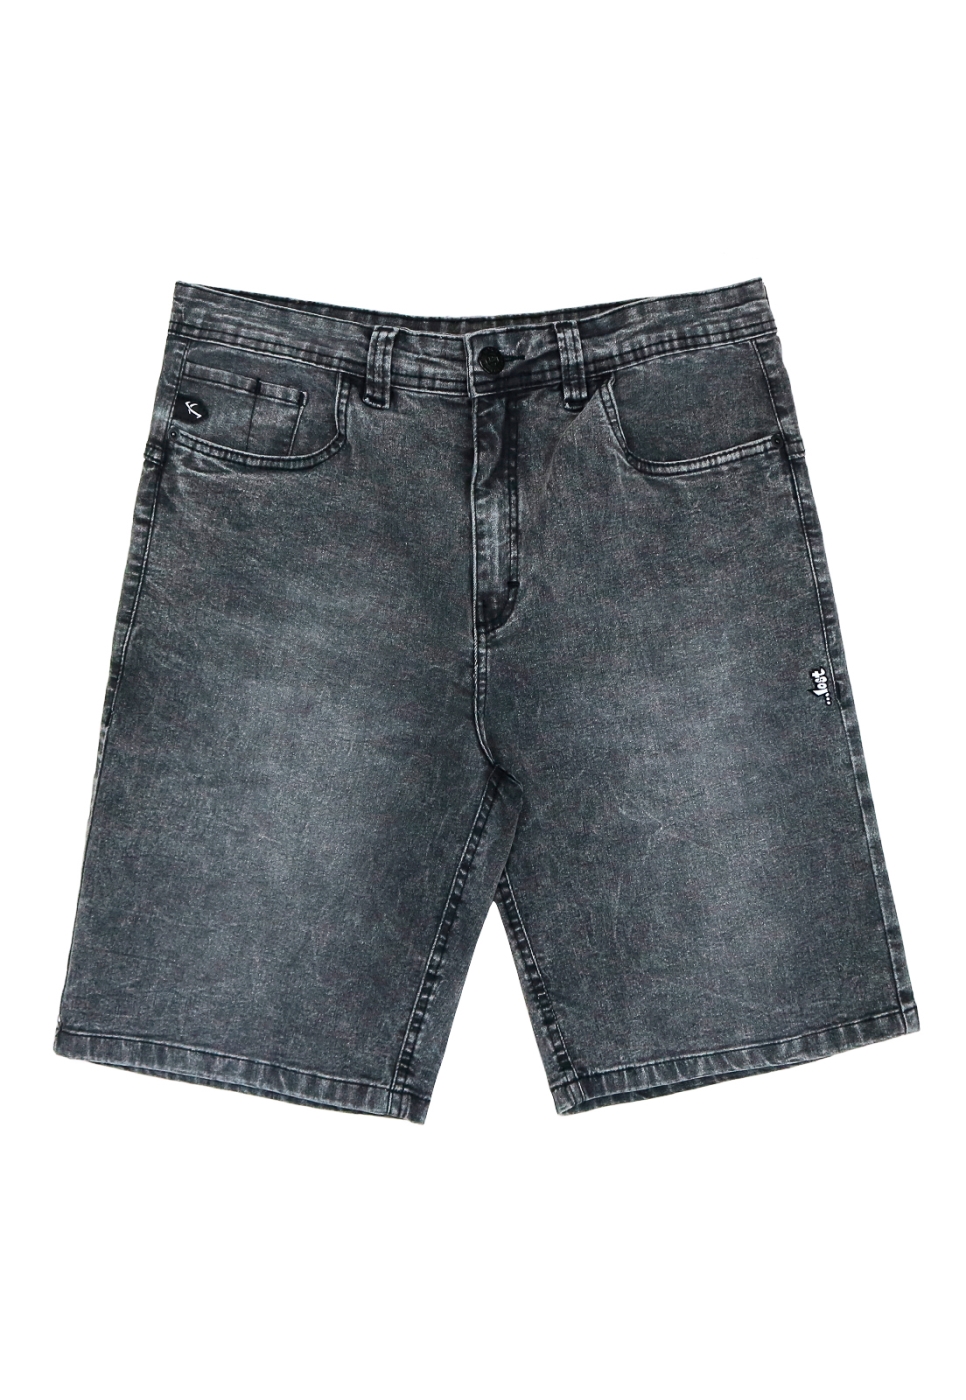 Walk Denim Relaxed Black Washed Lost